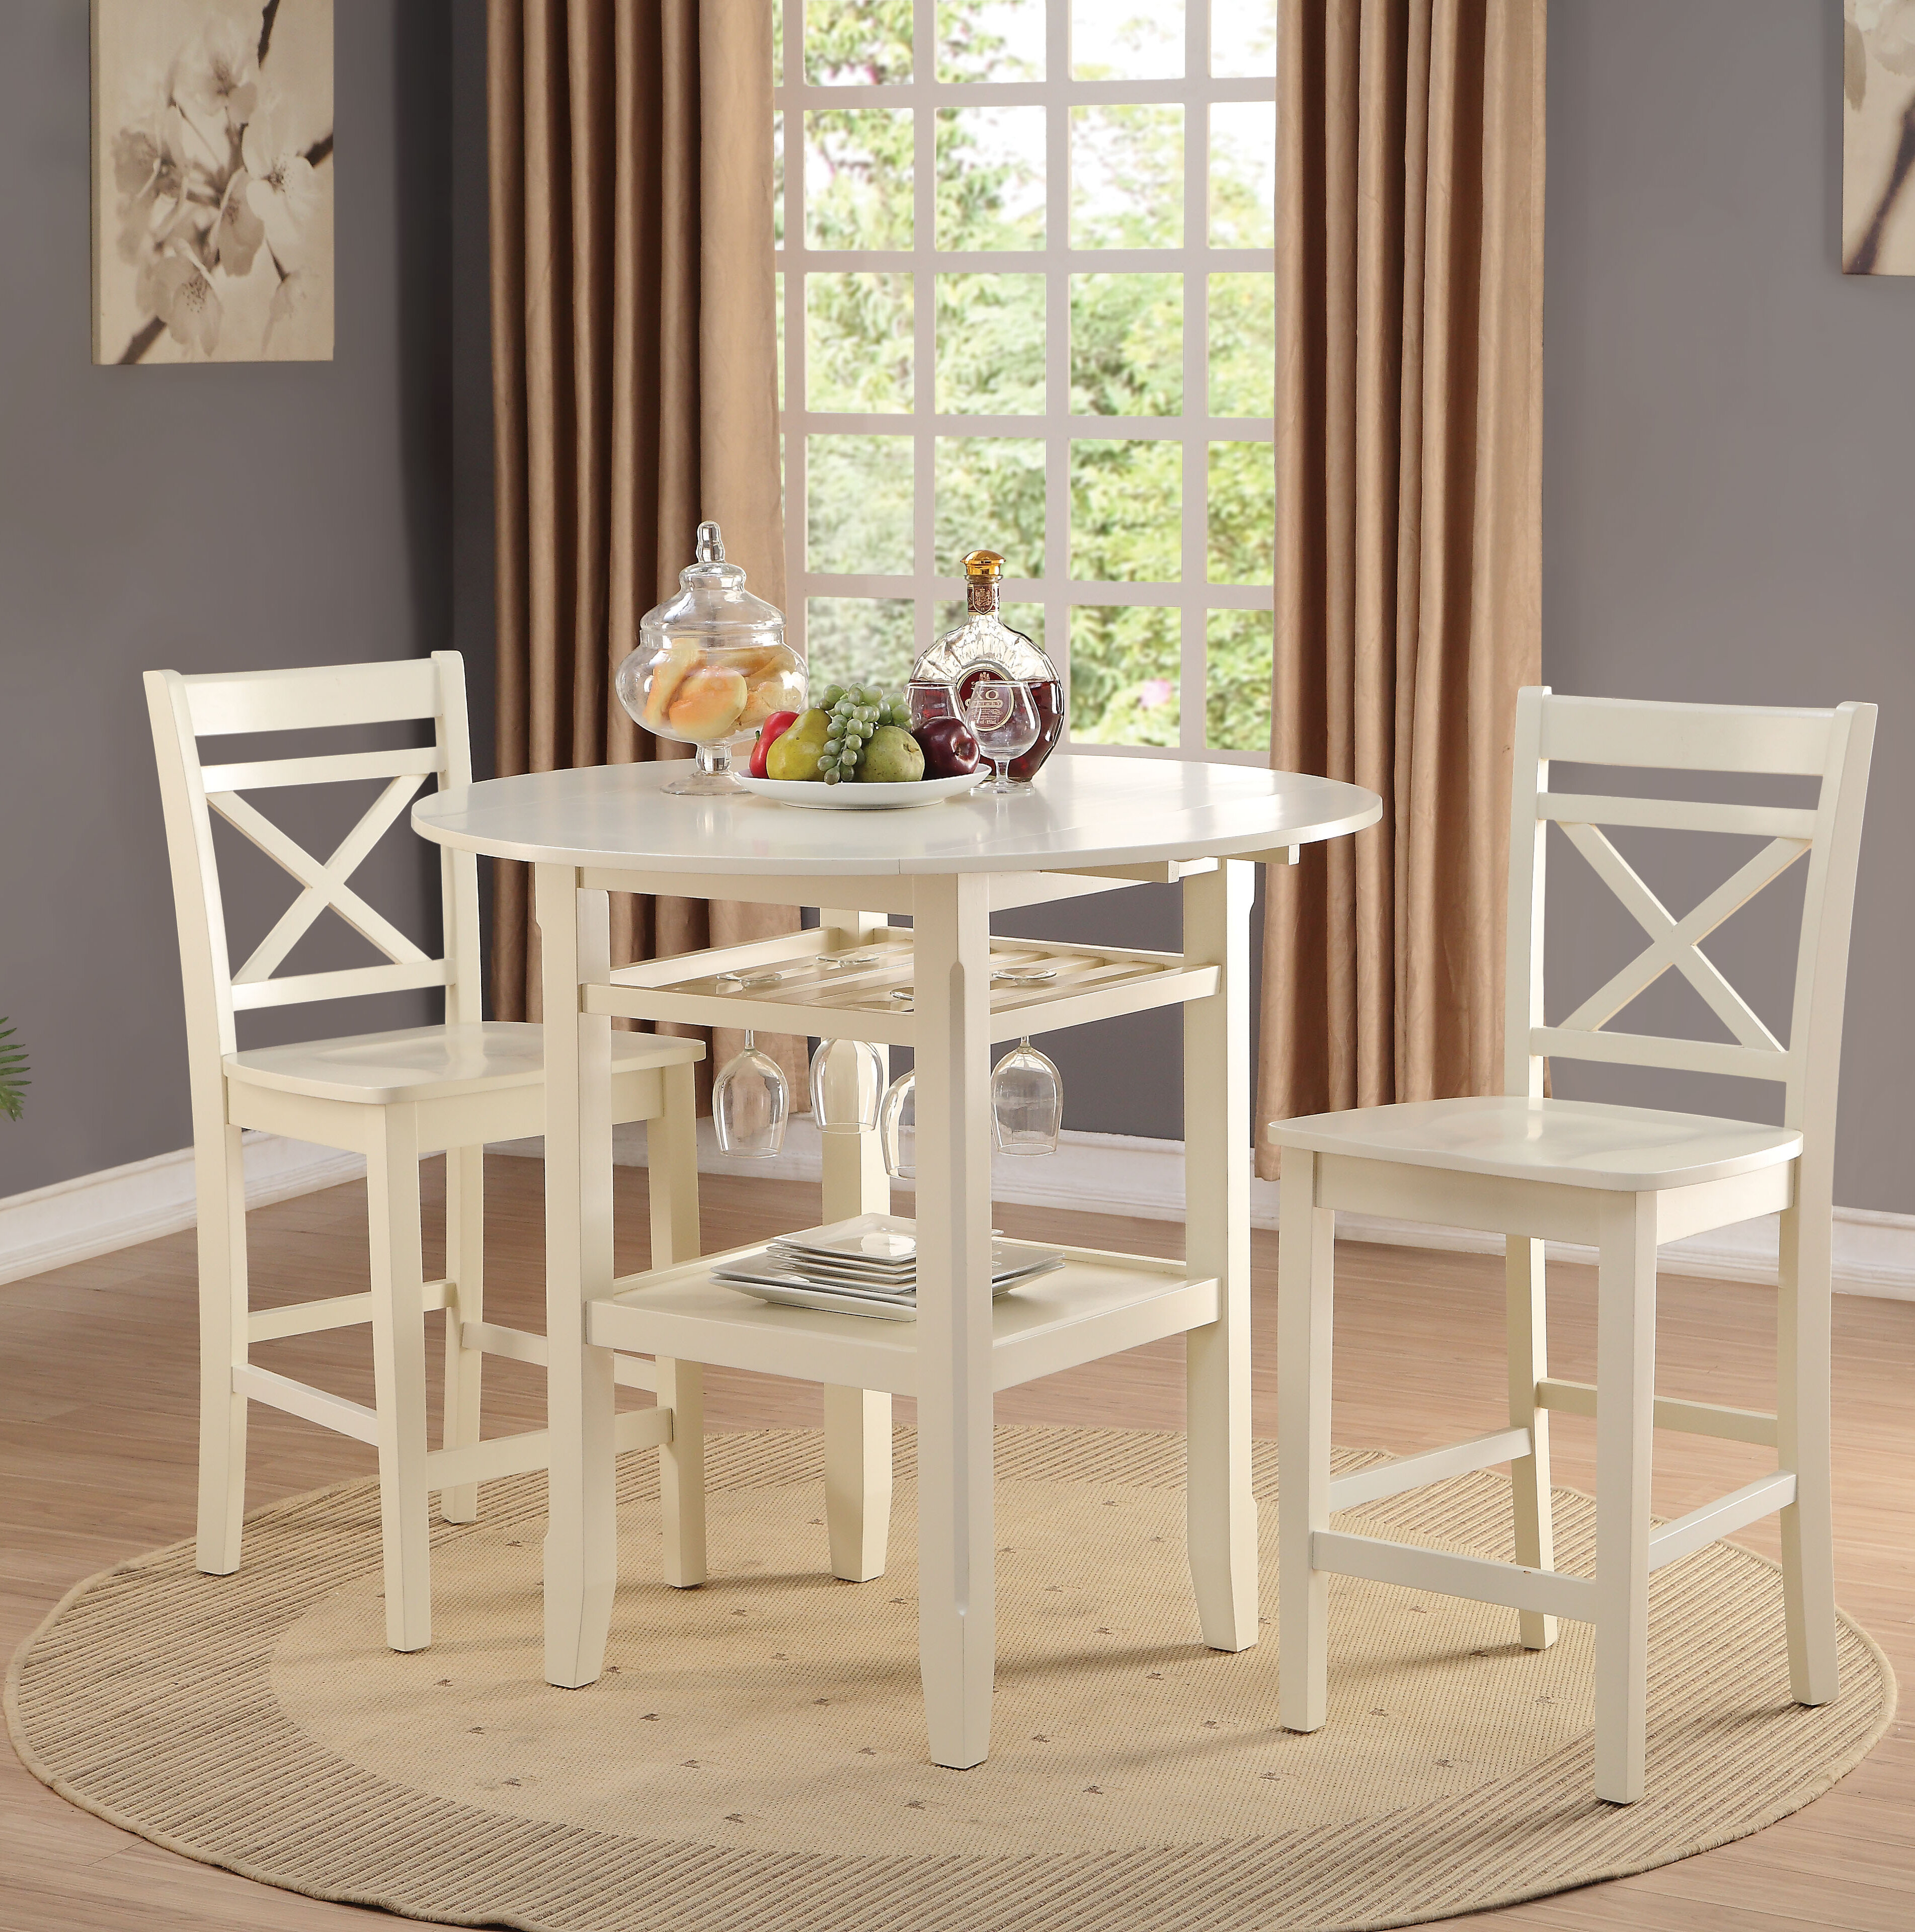 Rosecliff Heights Oswald 3 Person Counter Height Dining Set Wayfair